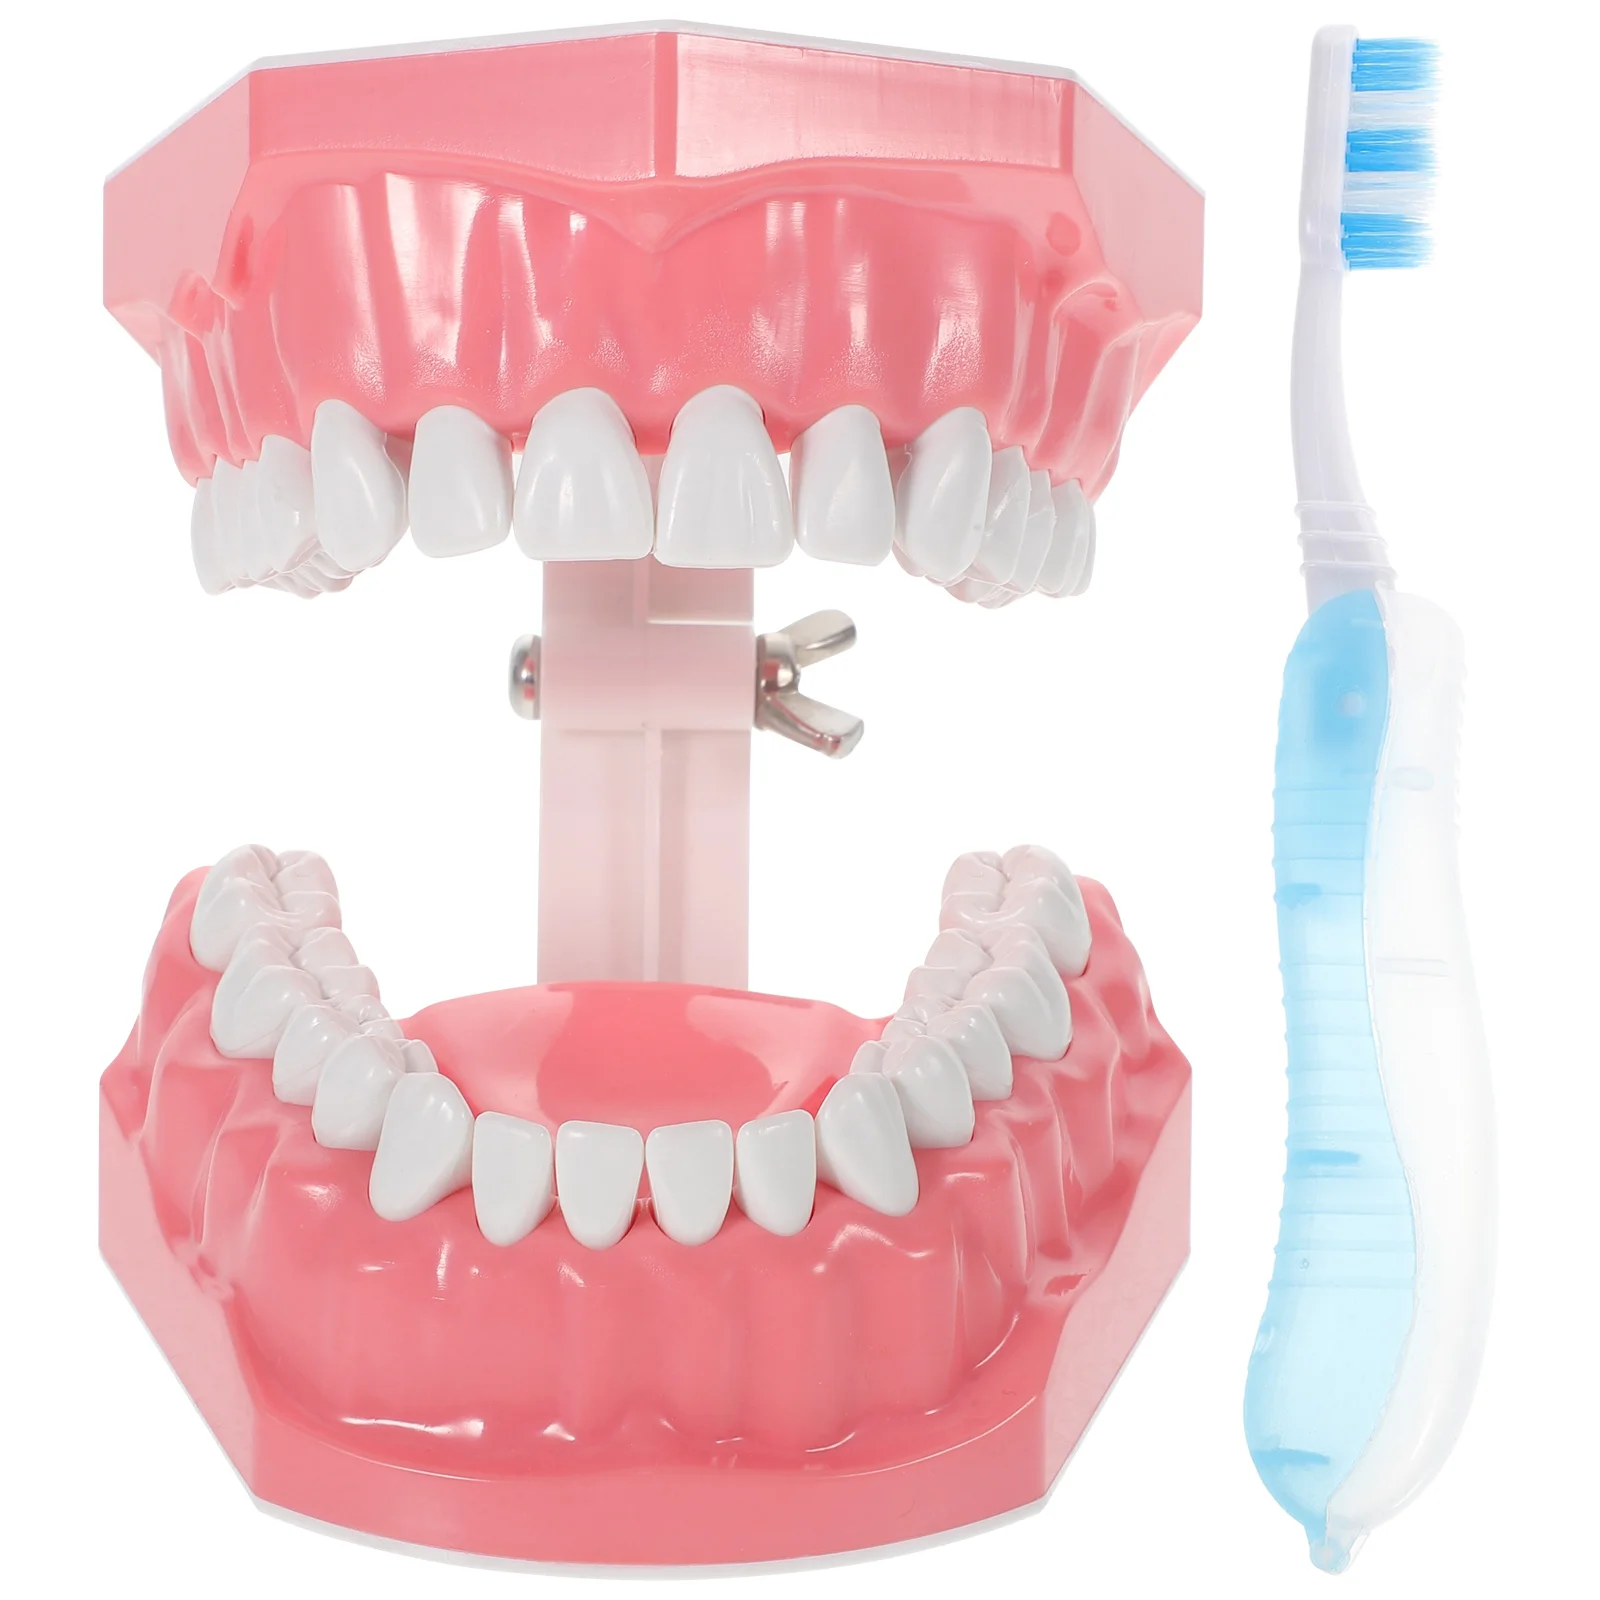 Gadgets Kids Model Supplies Typodont Tooth Brushing Model Models Tooth Brushing Model Child